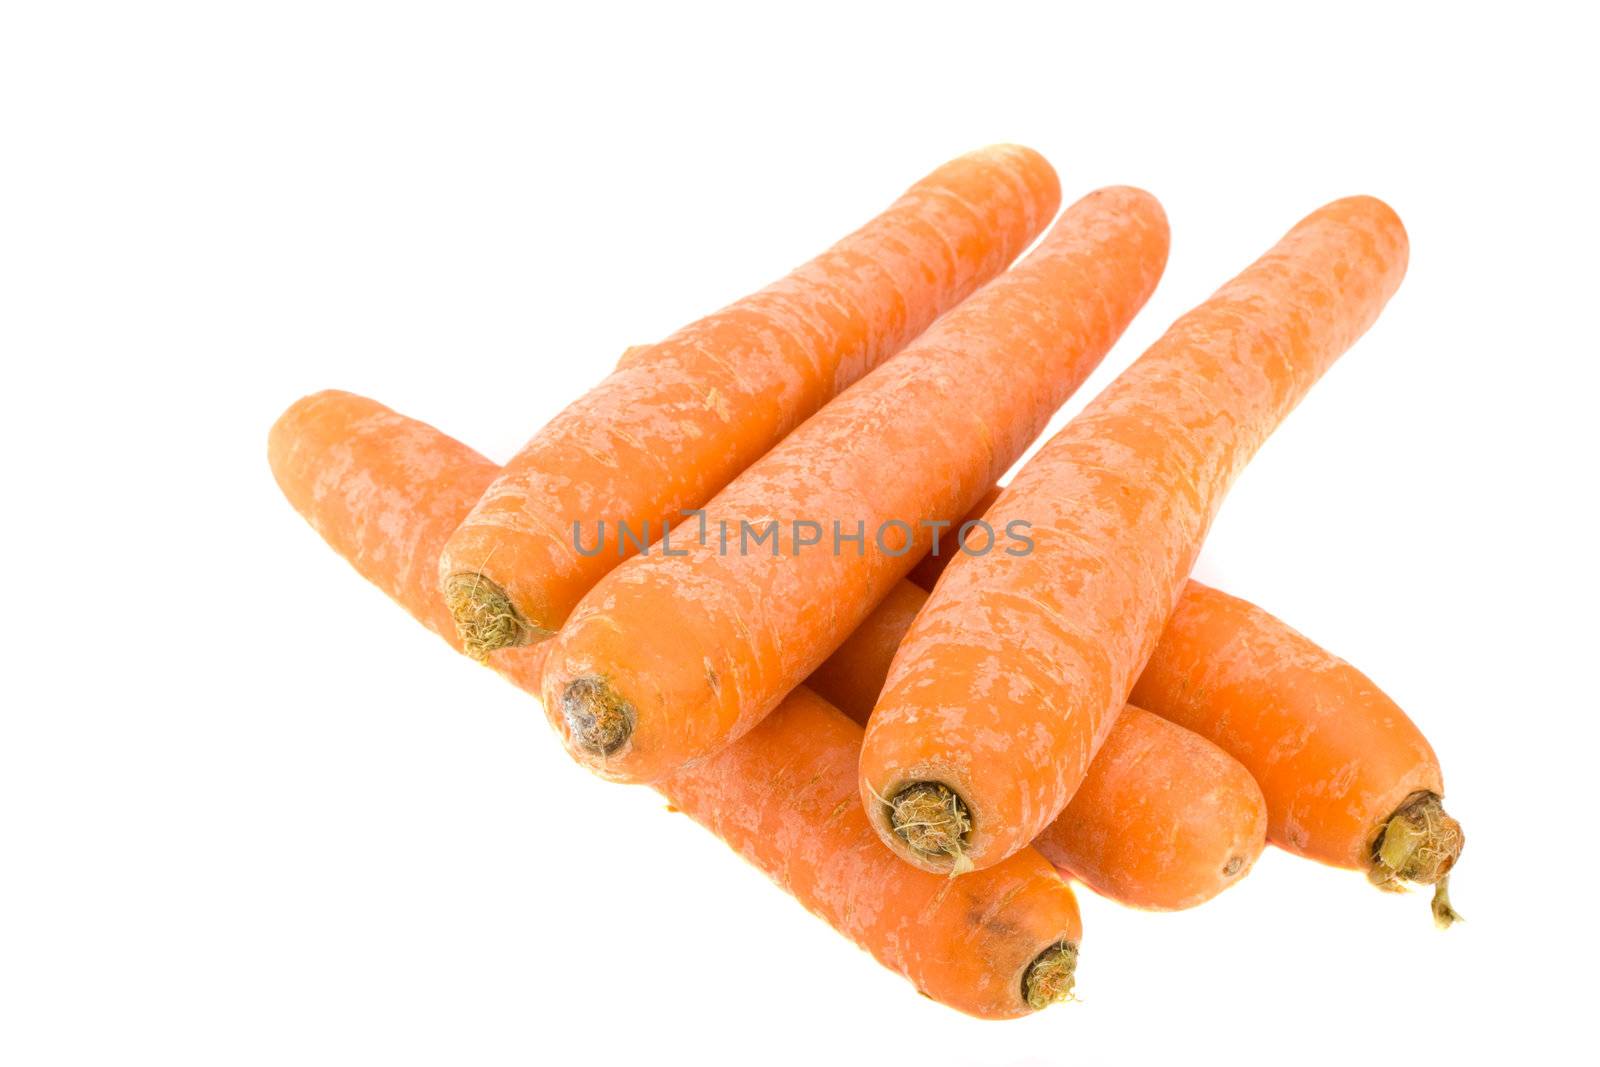 six carrots over white background